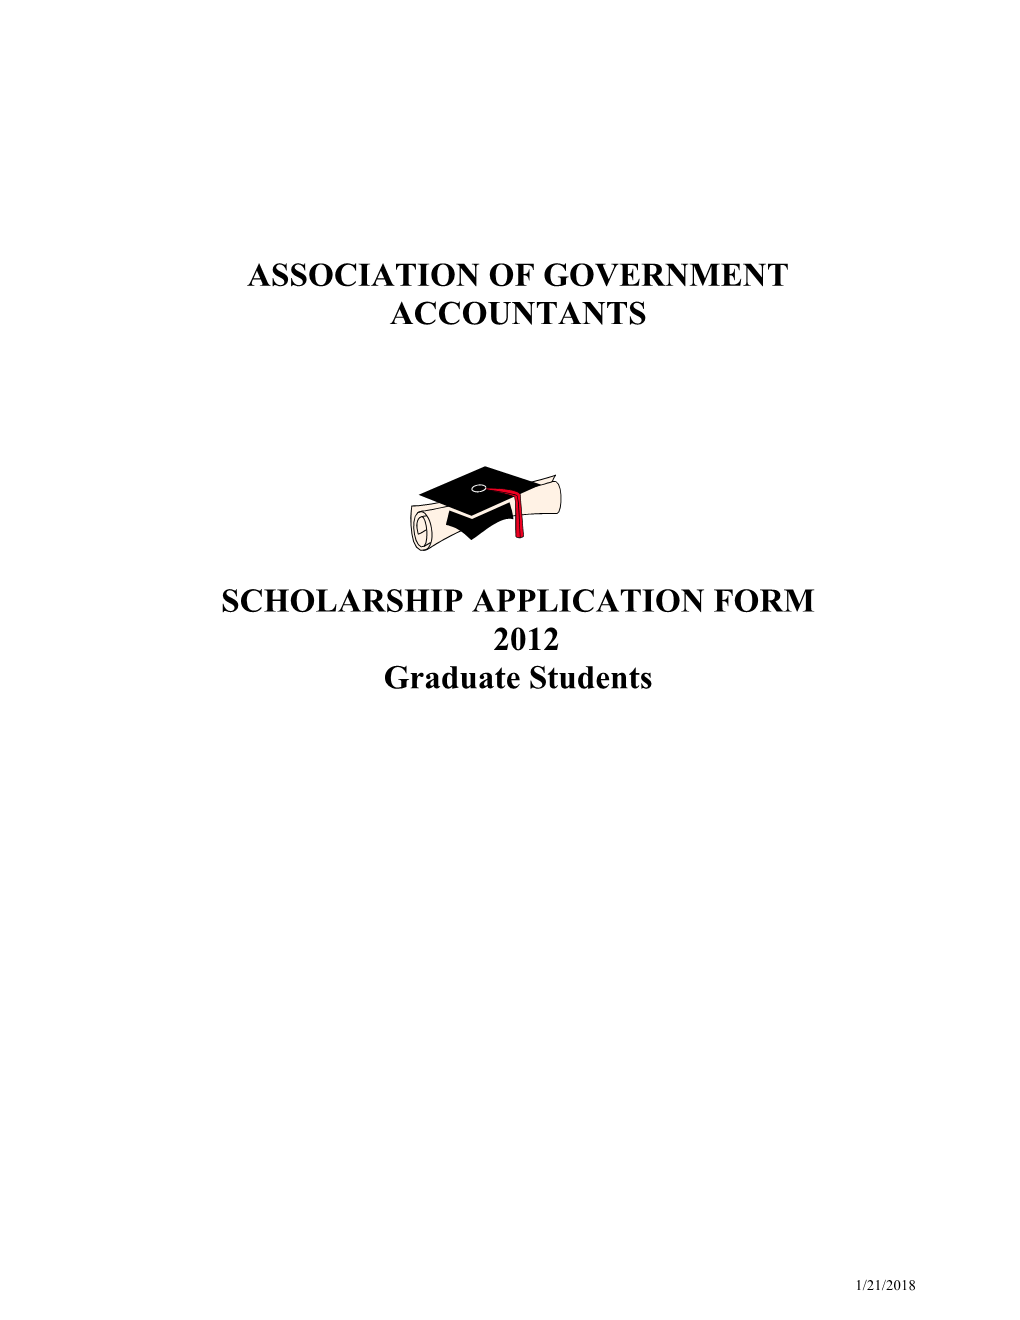 Association of Government Accountants s1